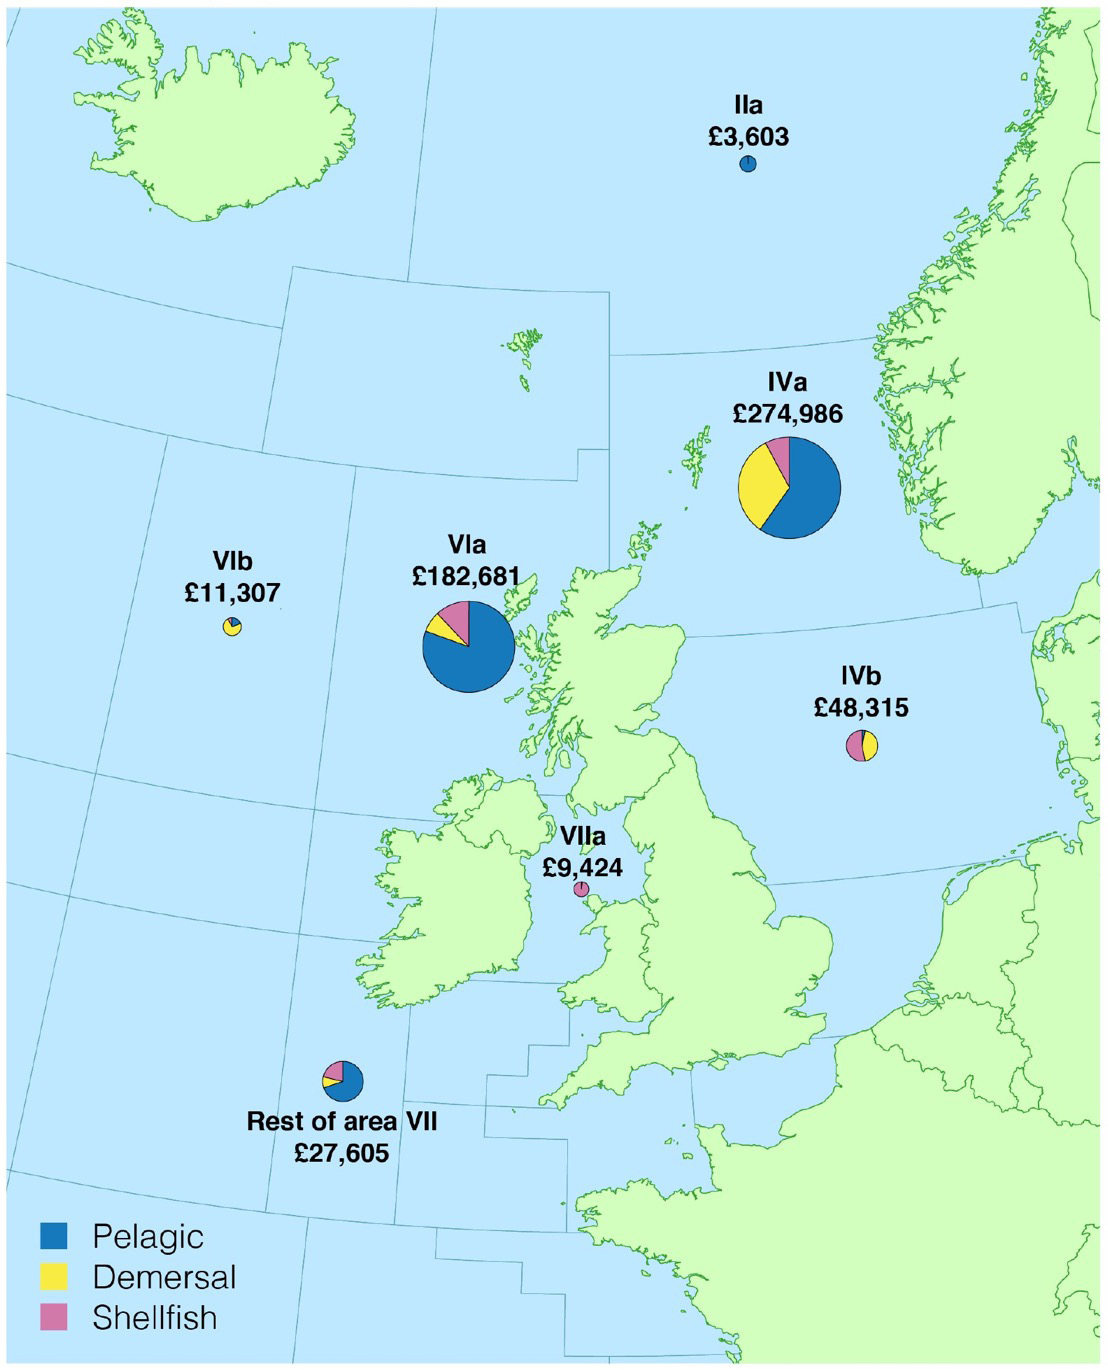 Figure 5. Value of landings by Scottish vessels by area of capture and species type, (£’thousands)